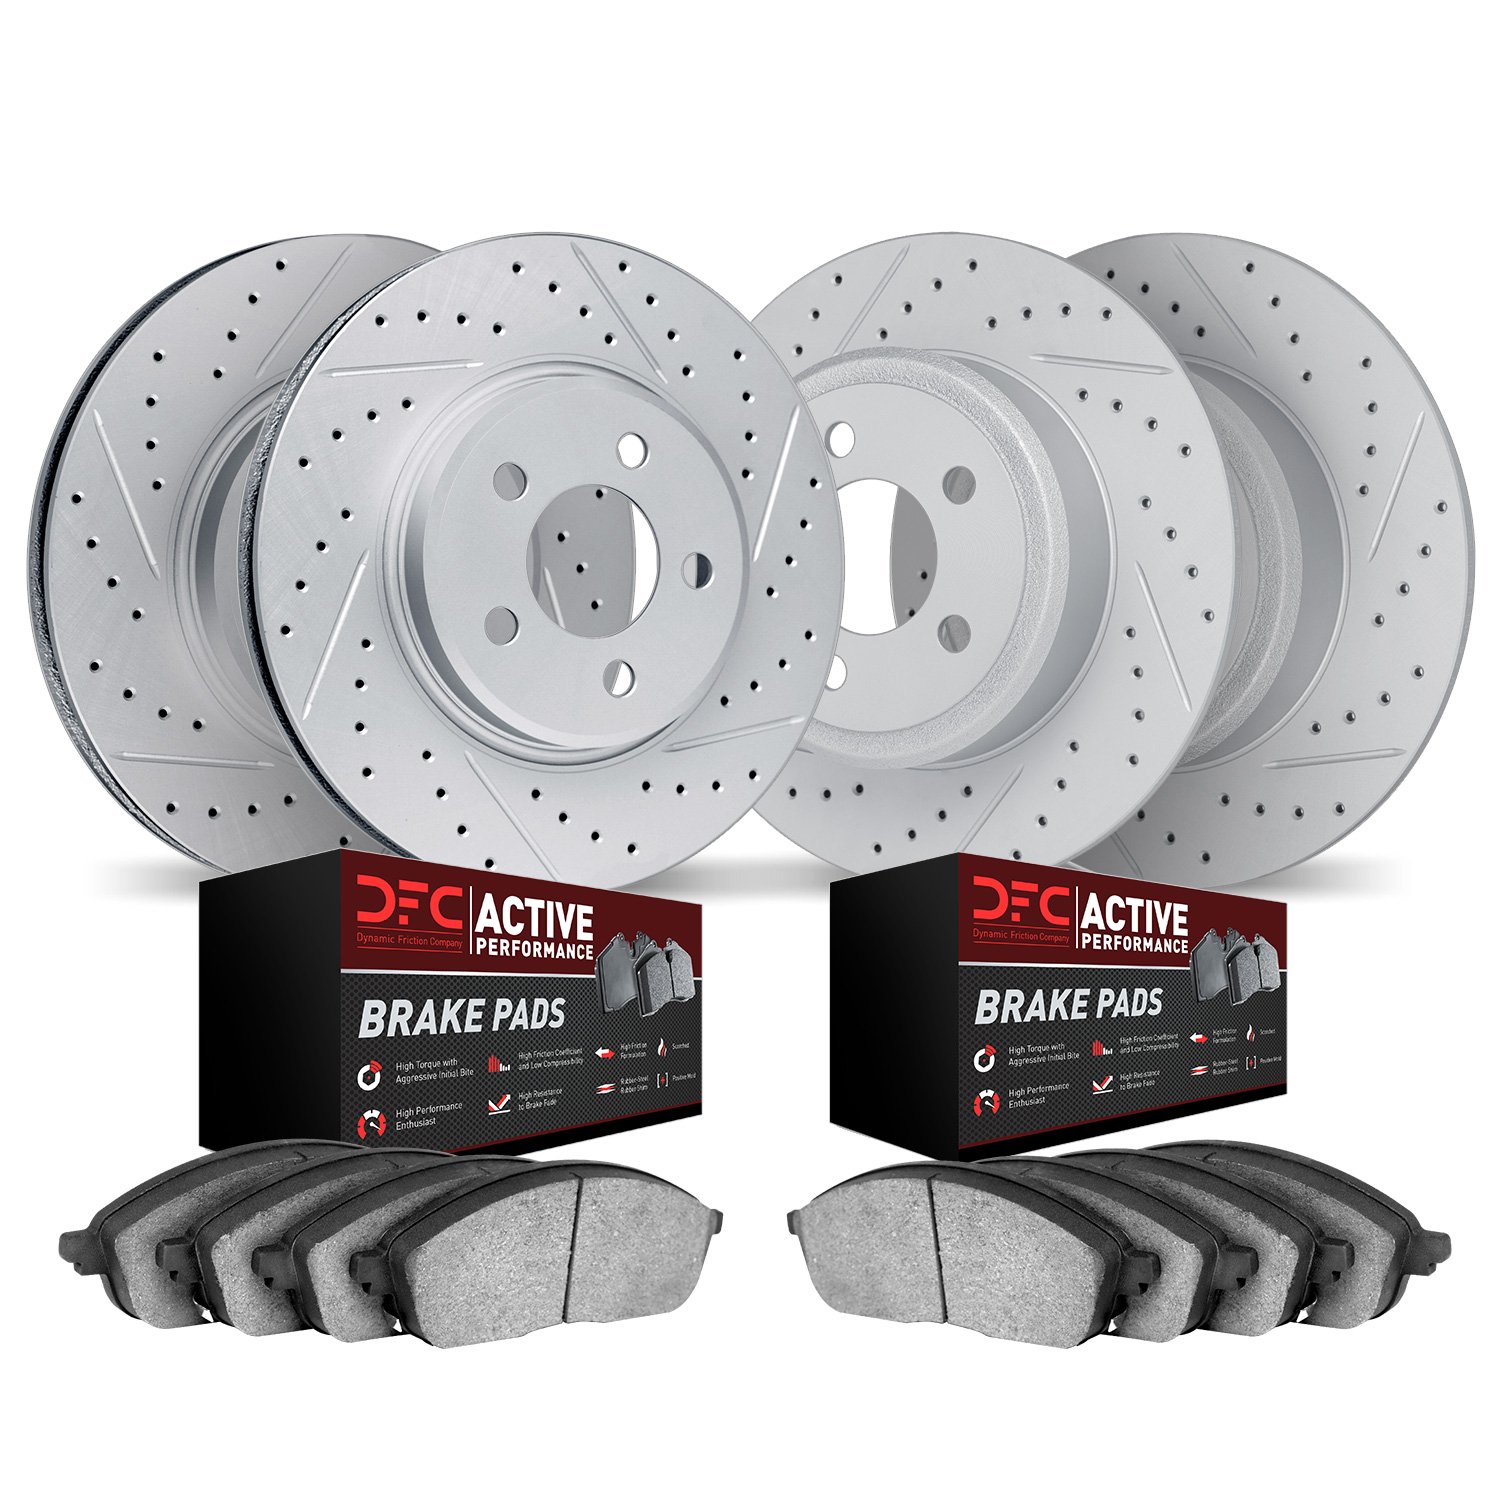 2704-54003 Geoperformance Drilled/Slotted Brake Rotors with Active Performance Pads Kit, 1994-1998 Ford/Lincoln/Mercury/Mazda, P